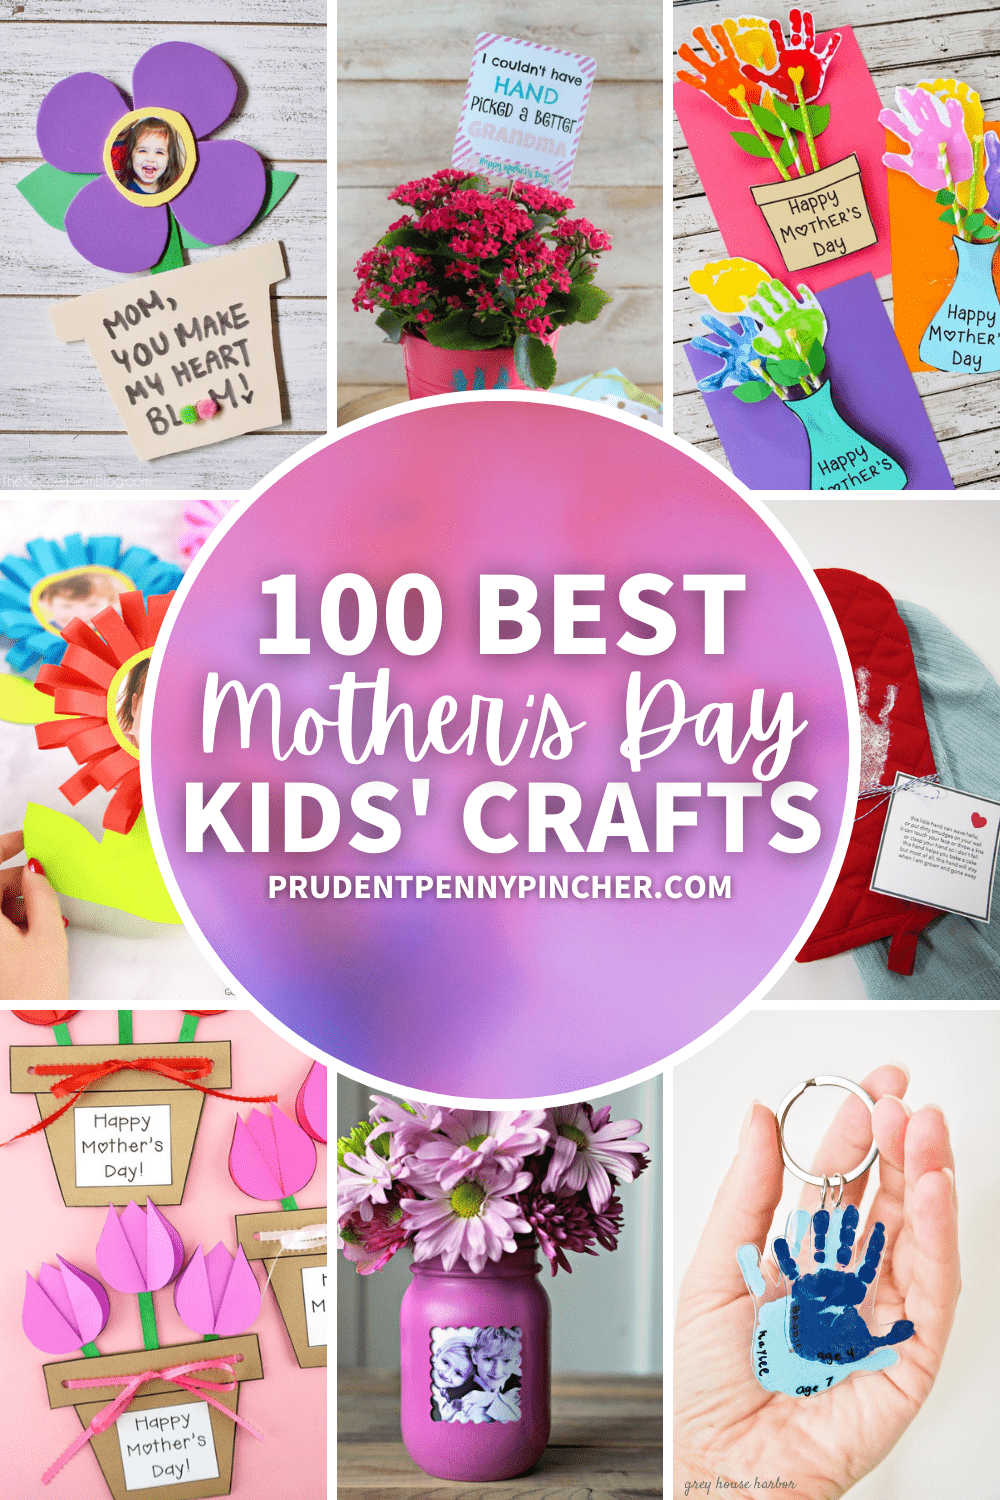 https://www.prudentpennypincher.com/wp-content/uploads/2022/03/mothers-day-crafts-for-kids-4.png